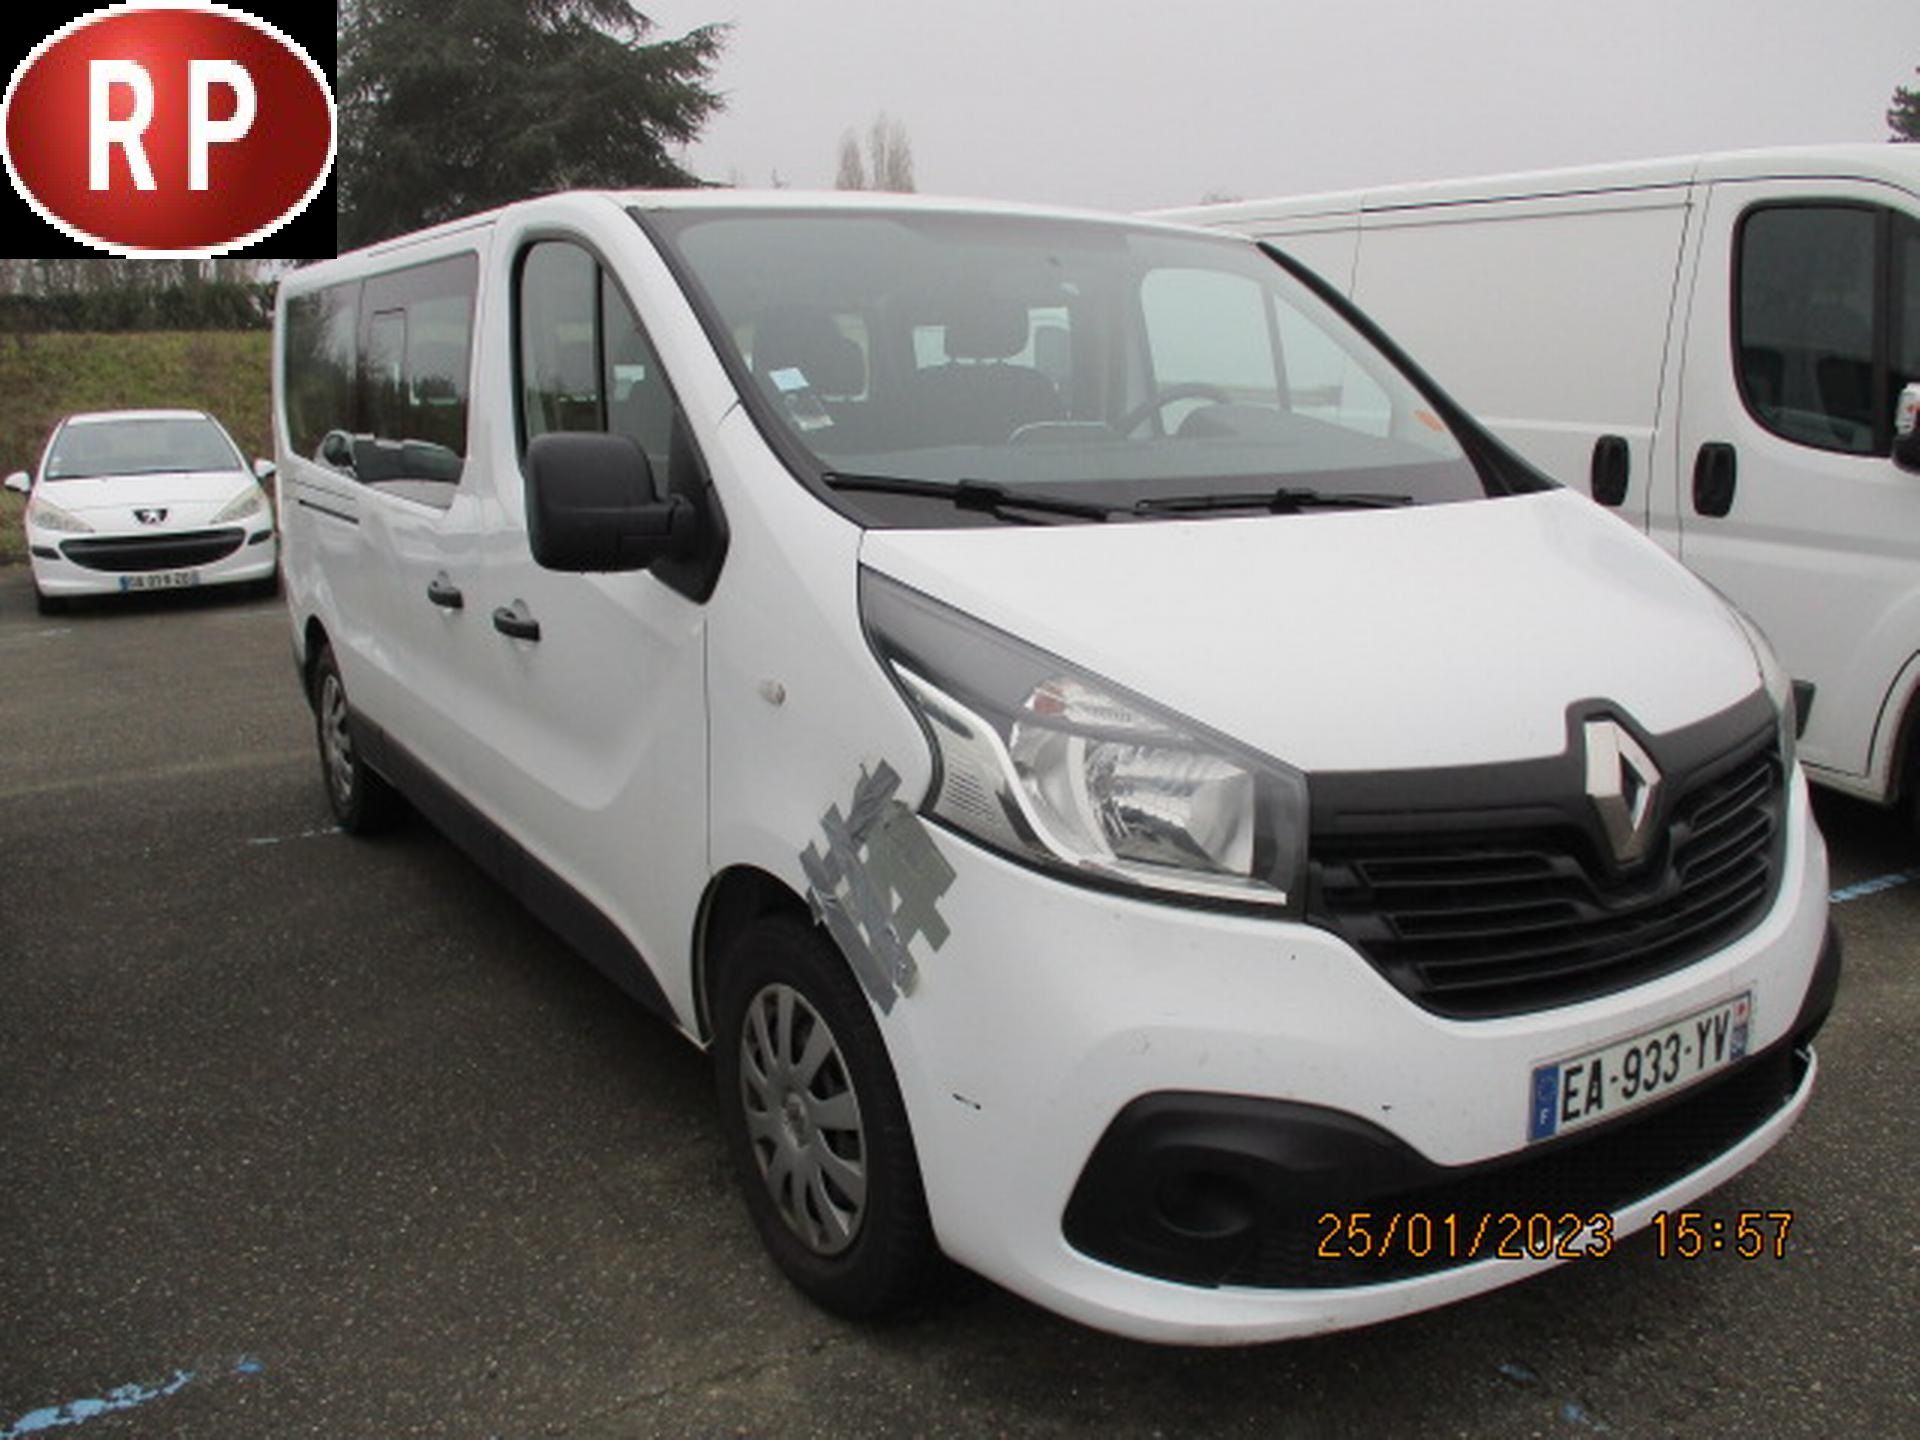 Null [RP] RENAULT TRAFIC Combi 1.6 dCi 125, Gazole, 9 places, imm. EA-933-YV, ty&hellip;